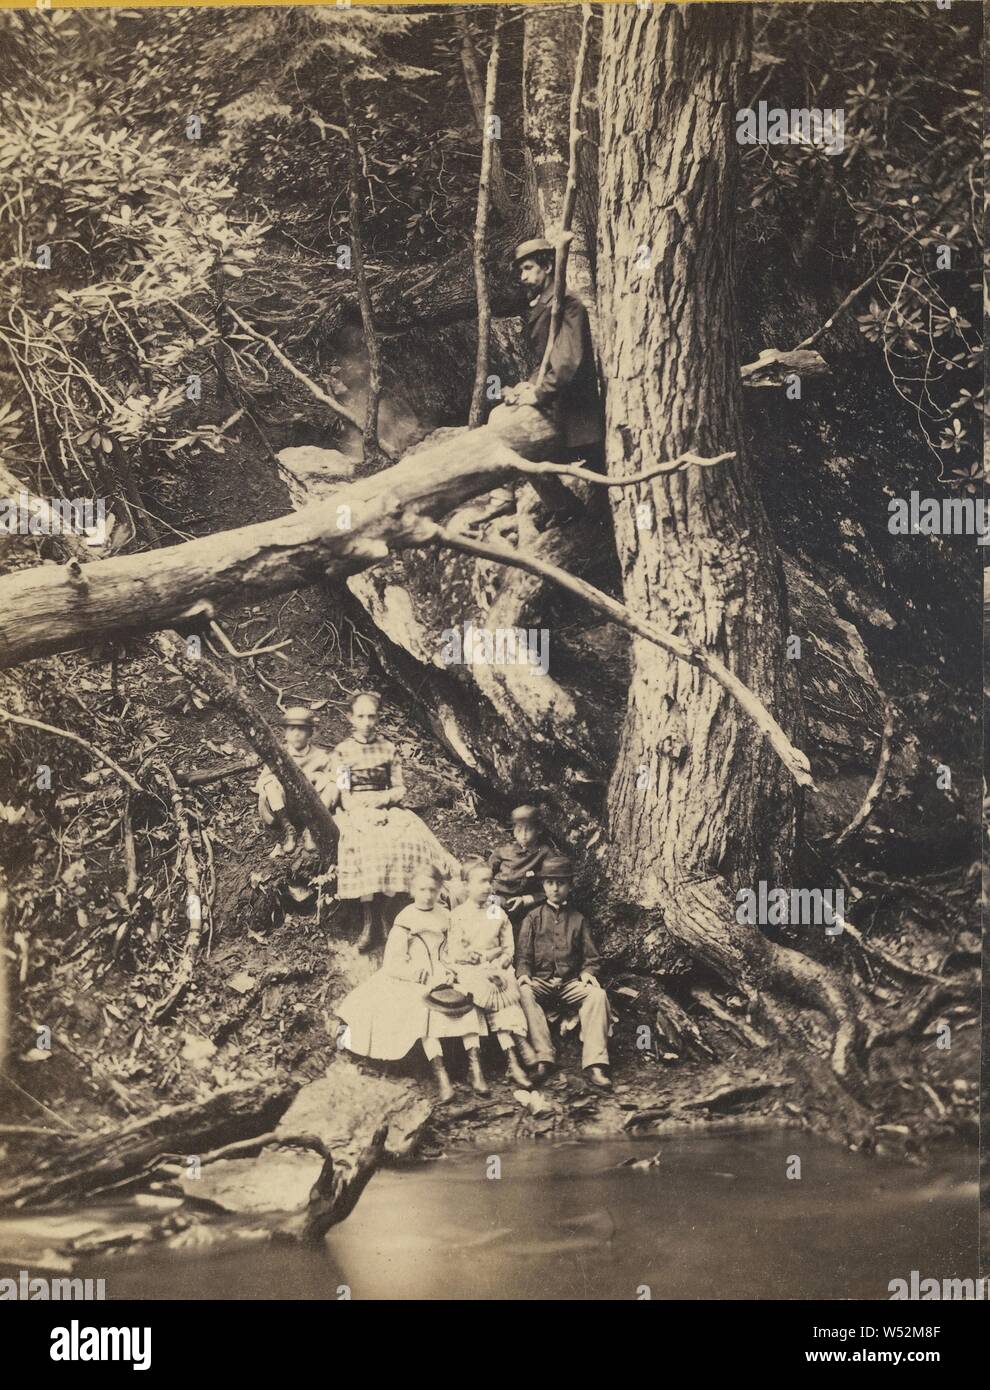 Delaware Water Gap, Penn'a. Babes in the Woods., Unknown maker, American, about 1875, Albumen silver print Stock Photo